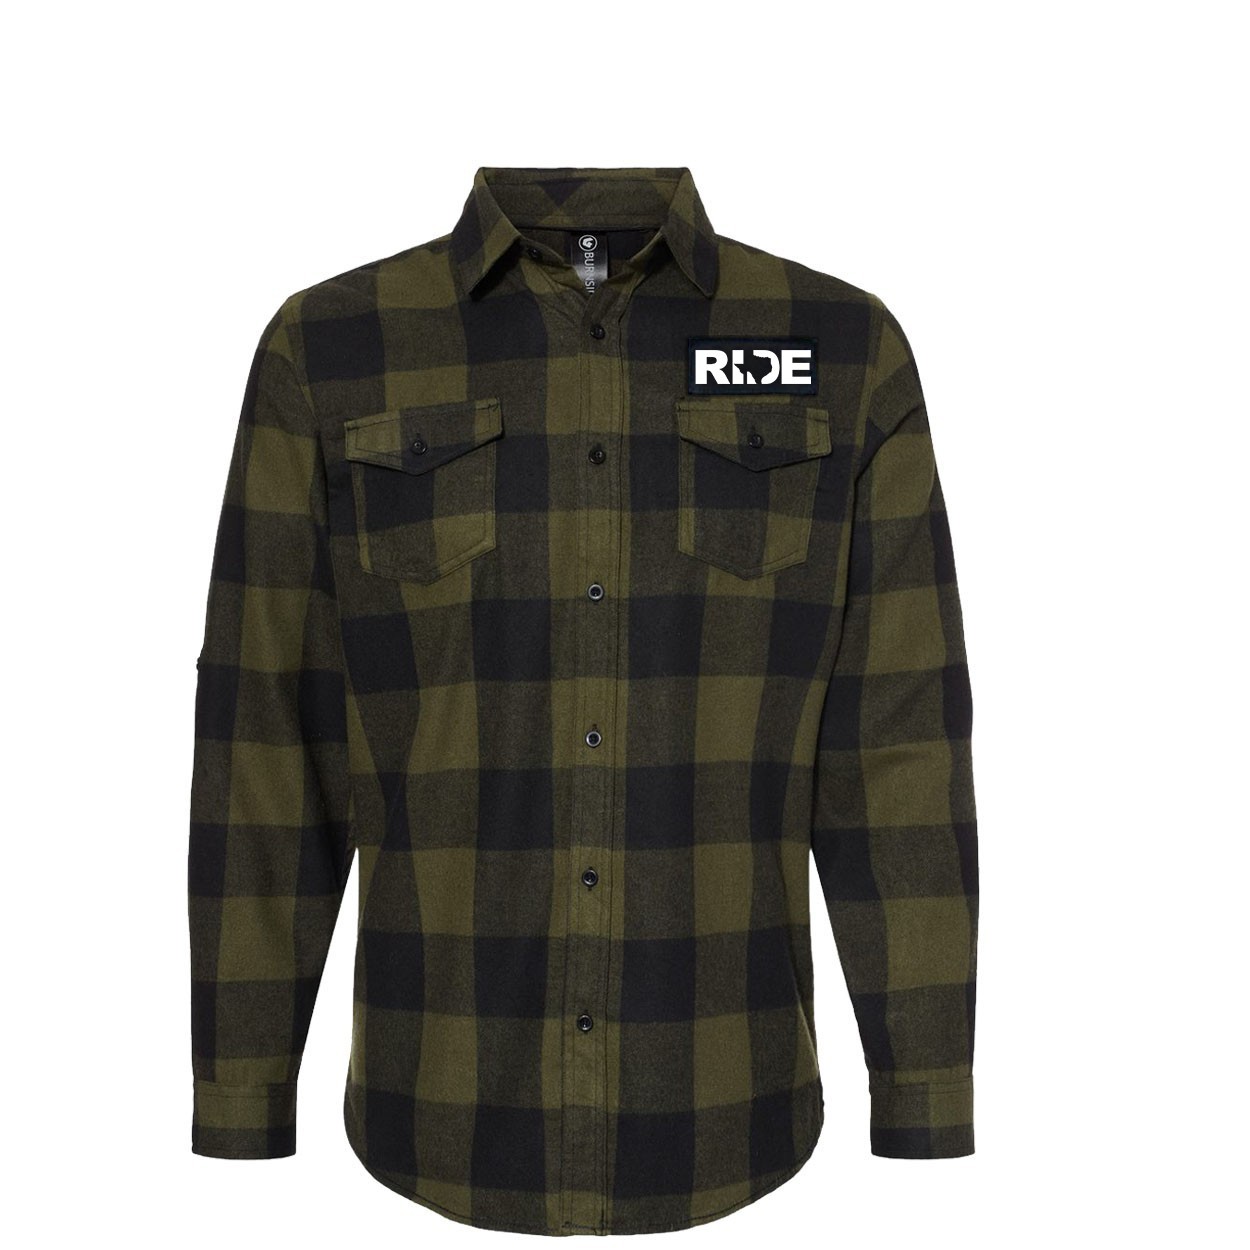 Ride Texas Classic Unisex Long Sleeve Woven Patch Flannel Shirt Army/Black (White Logo)